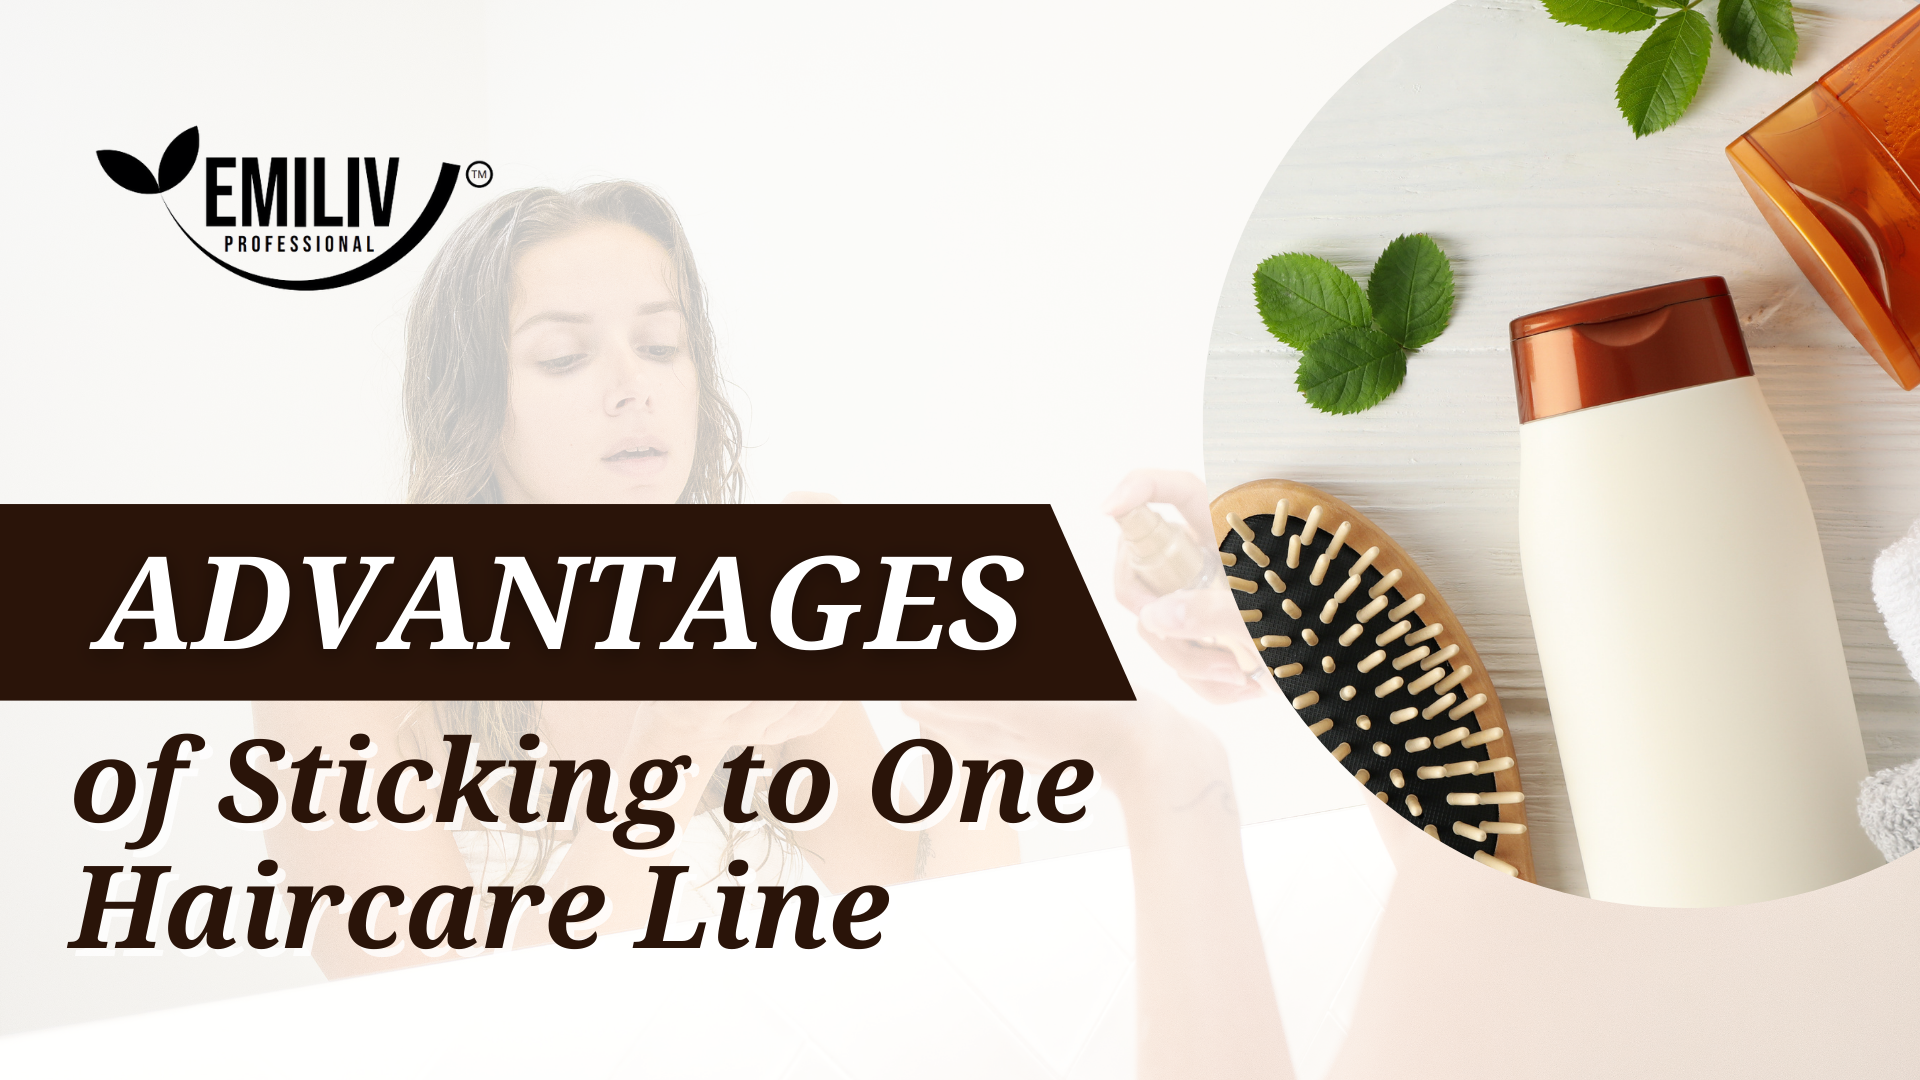 The Advantages of Sticking to One Hair Care Line